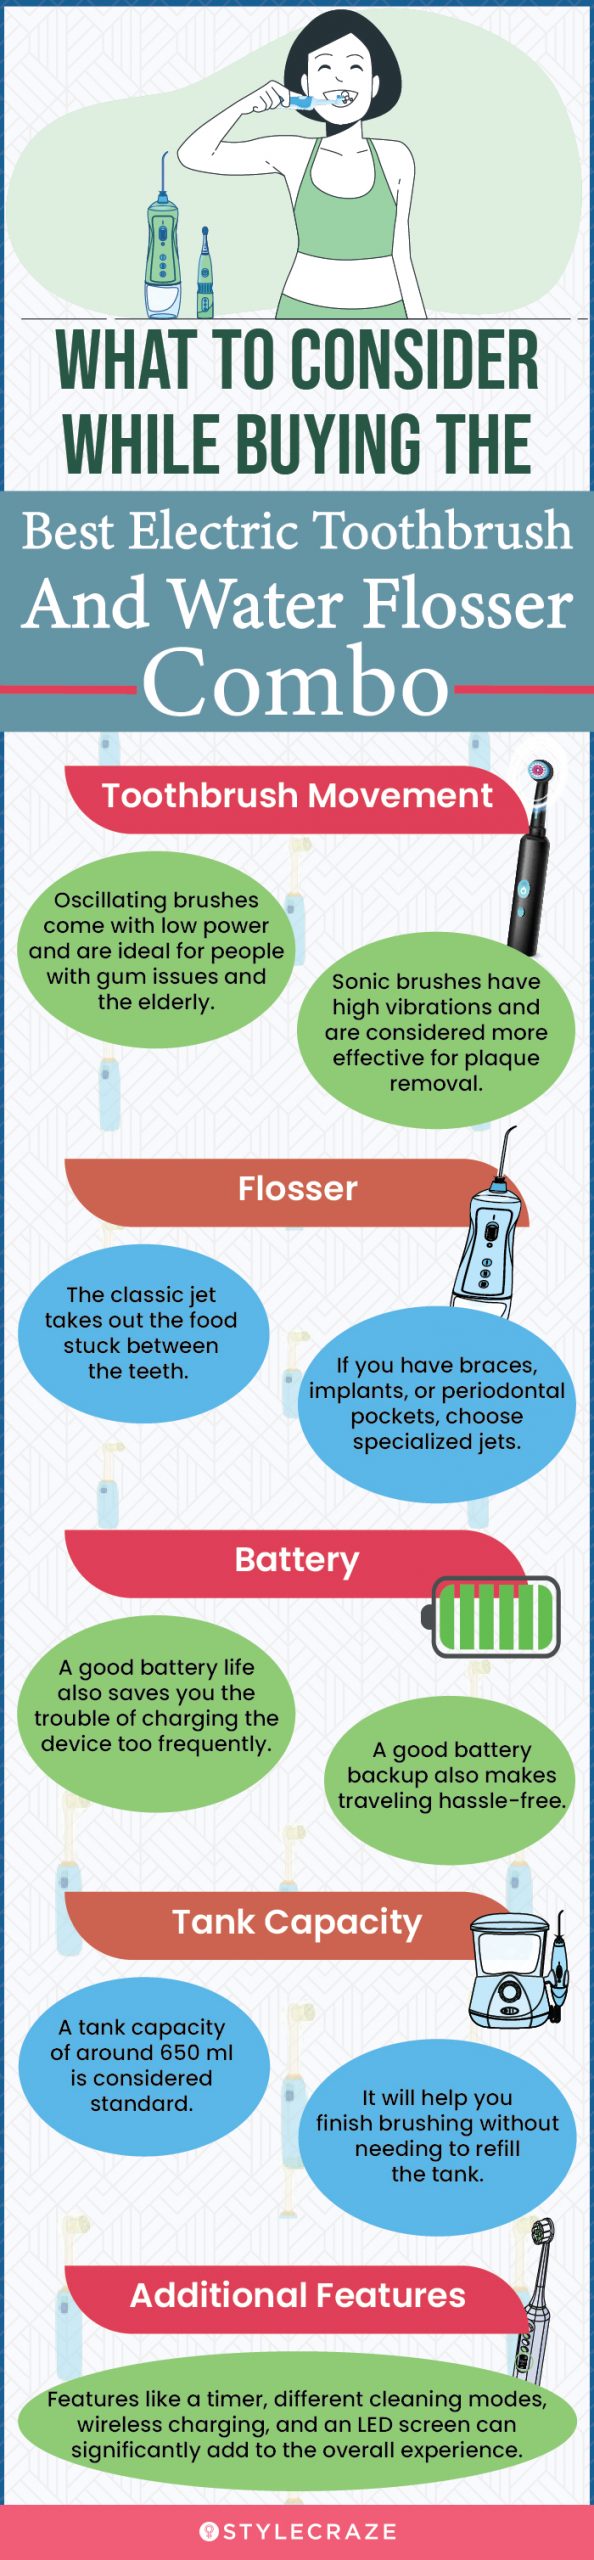 What To Consider While Buying The Best Electric Toothbrush And Water Flosser Combo  [infographic]